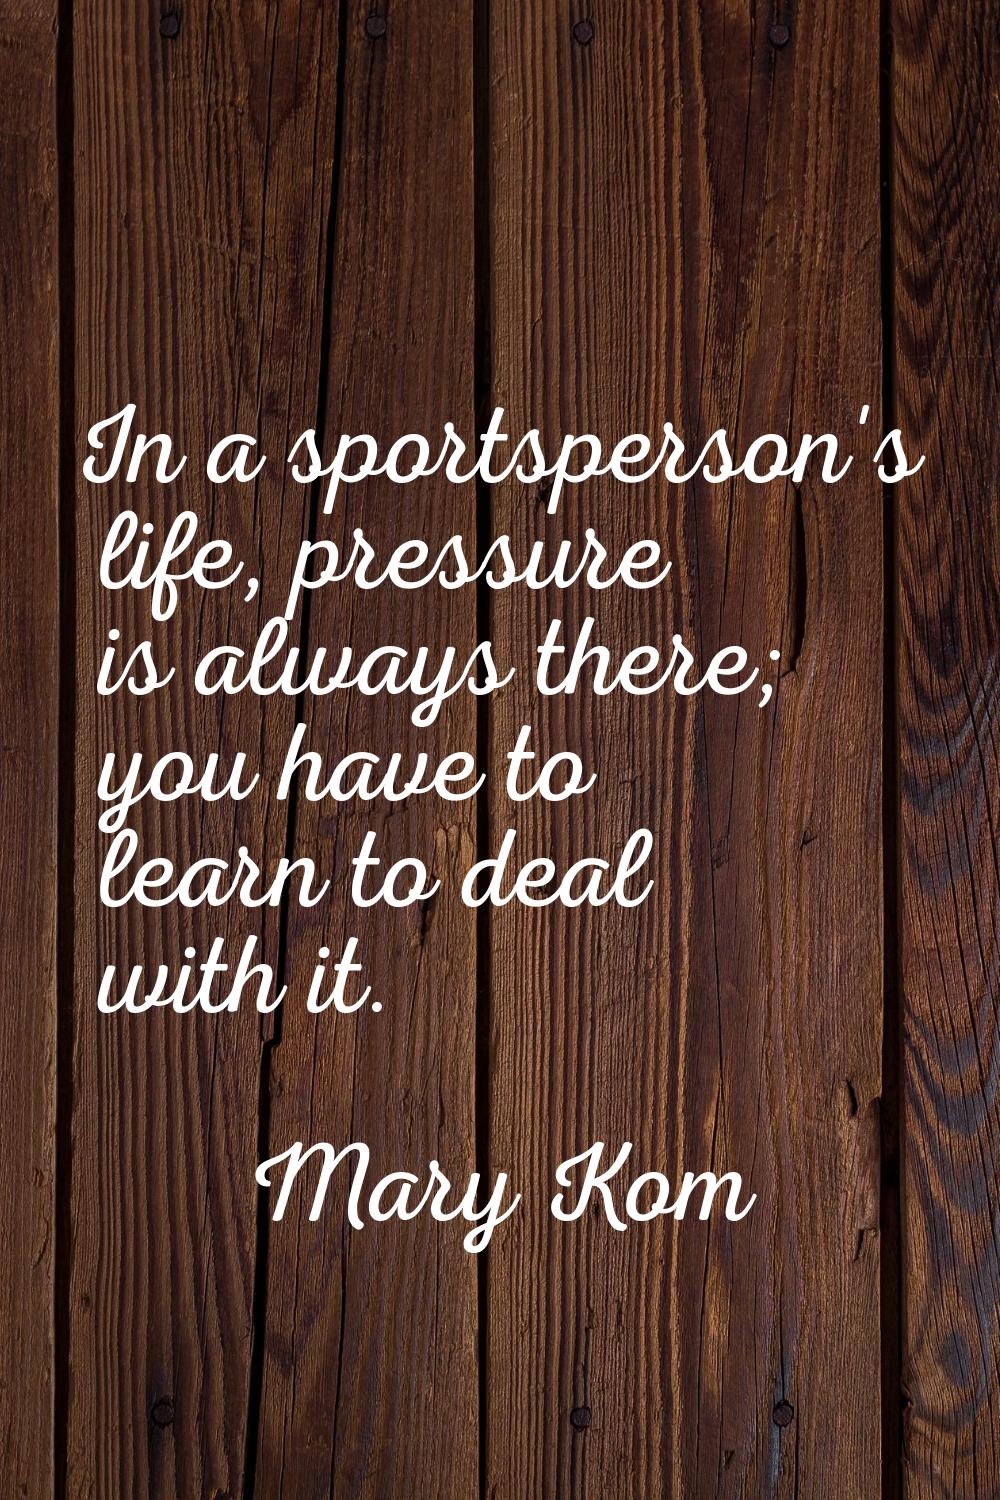 In a sportsperson's life, pressure is always there; you have to learn to deal with it.